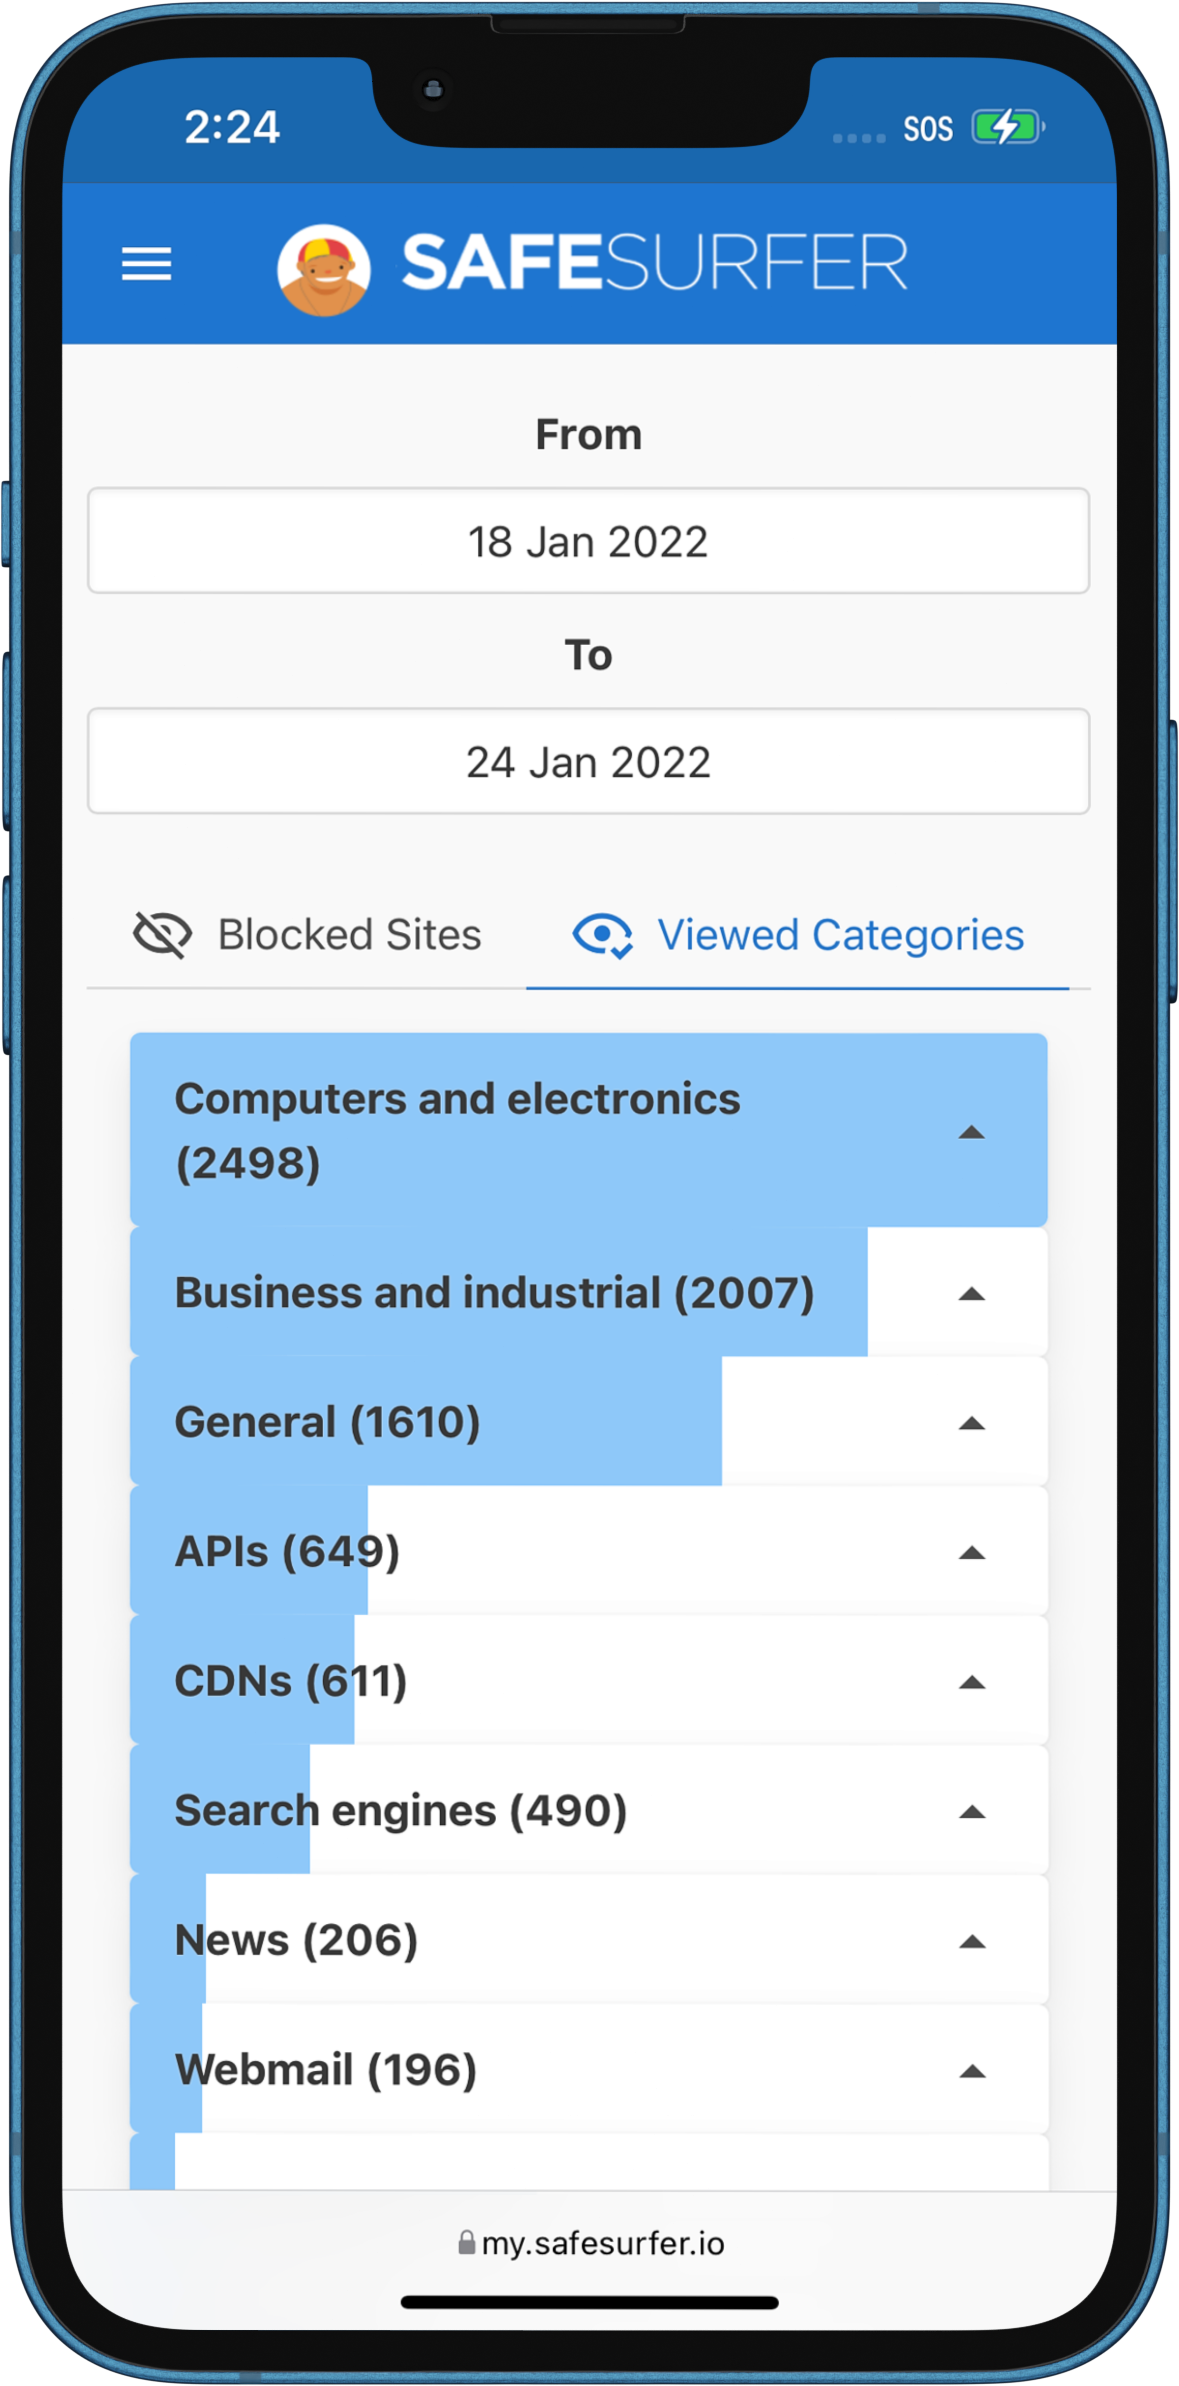 iPhone showing Safe Surfer internet history user interface, with recent activity for Computers and Electronics, Business and Industrial, General, APIs, CDNs, Search engines, News, and Webmail